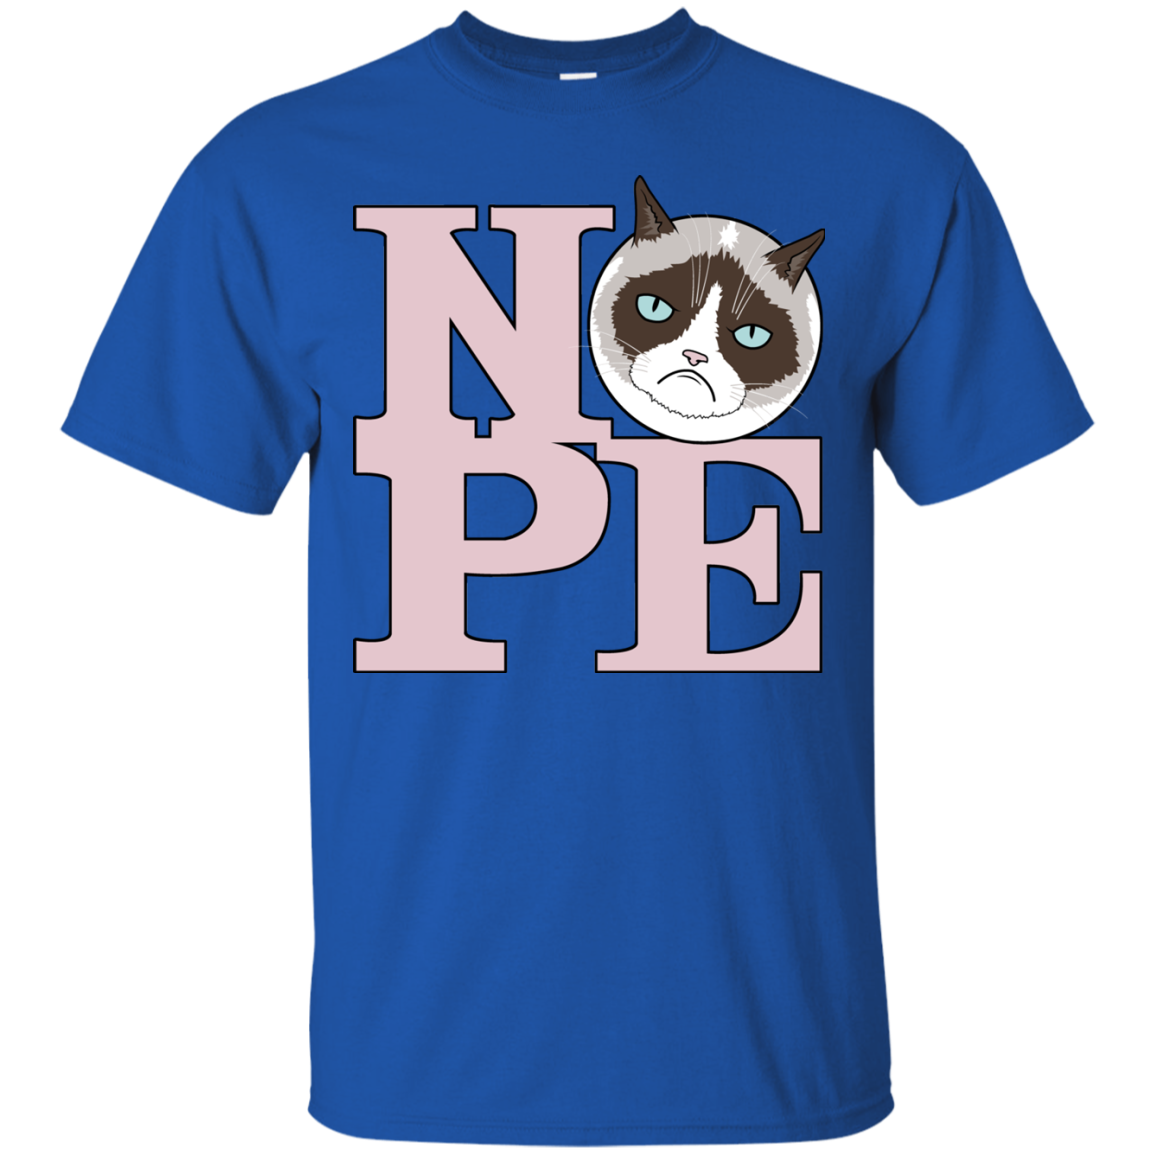 All You Need is NOPE T-Shirt